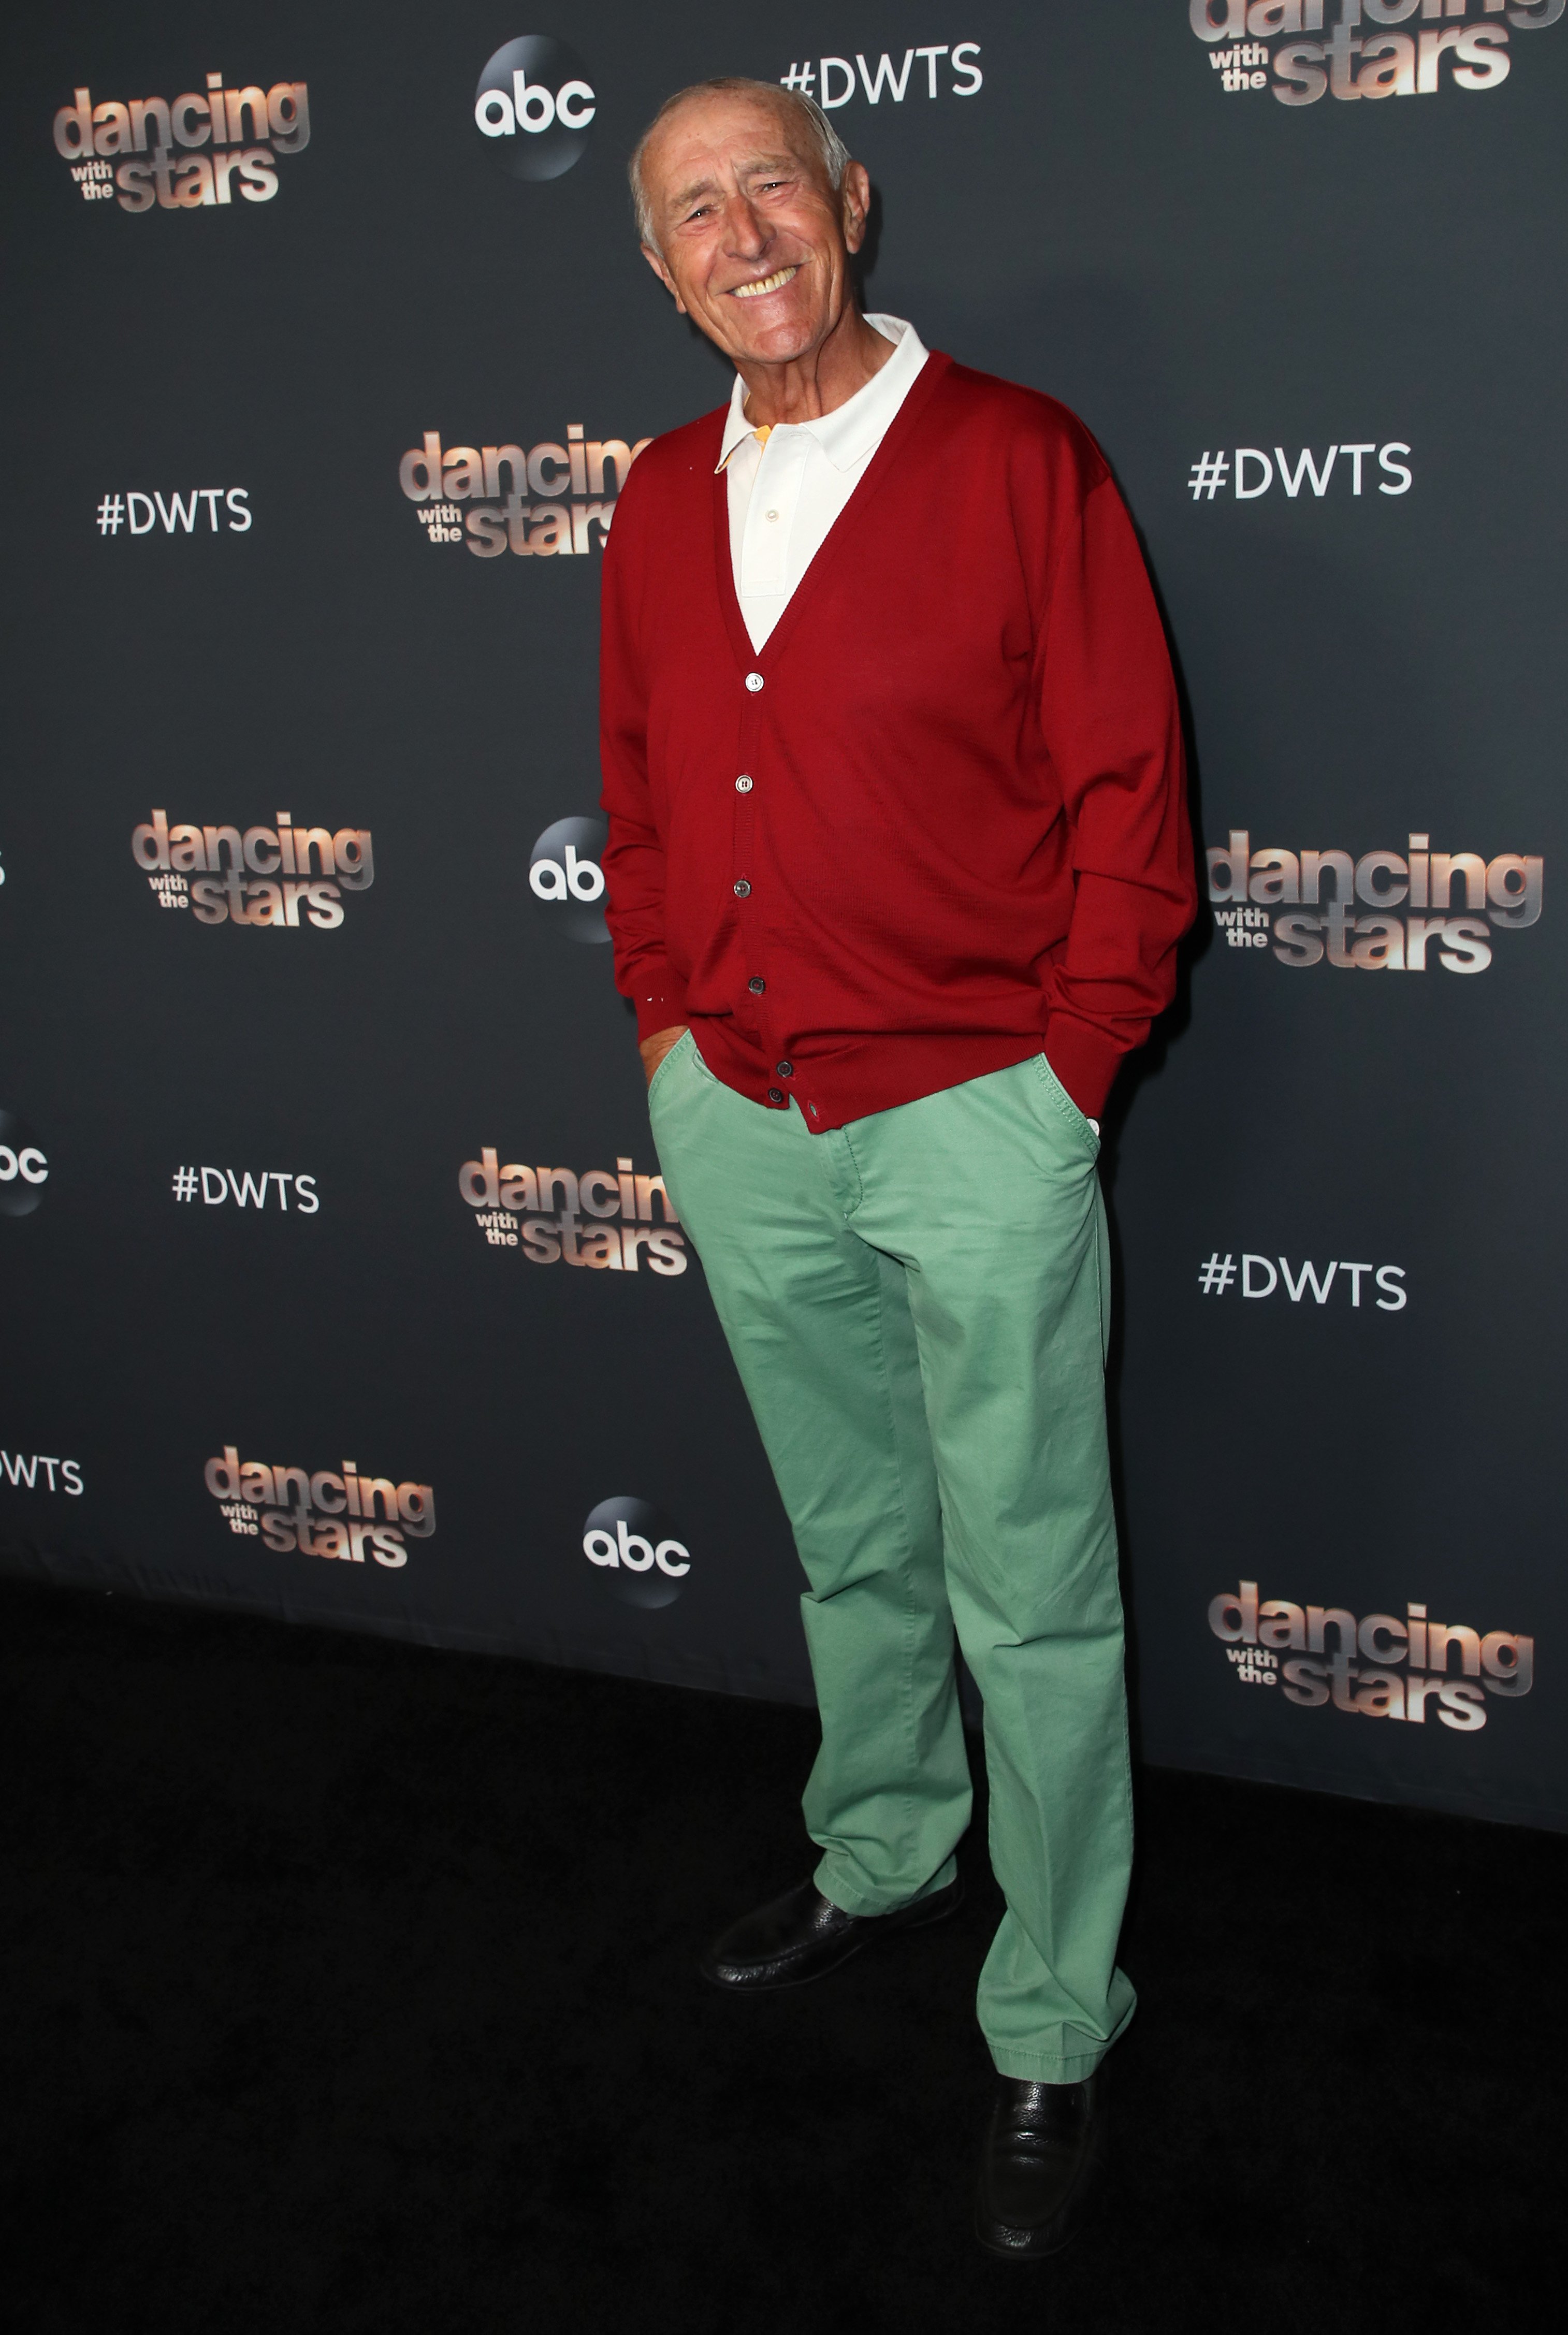 Len Goodman attends "Dancing With The Stars" Season 28 Top 6 Finalists at Dominque Ansel at The Grove on November 04, 2019. | Source: Getty Images